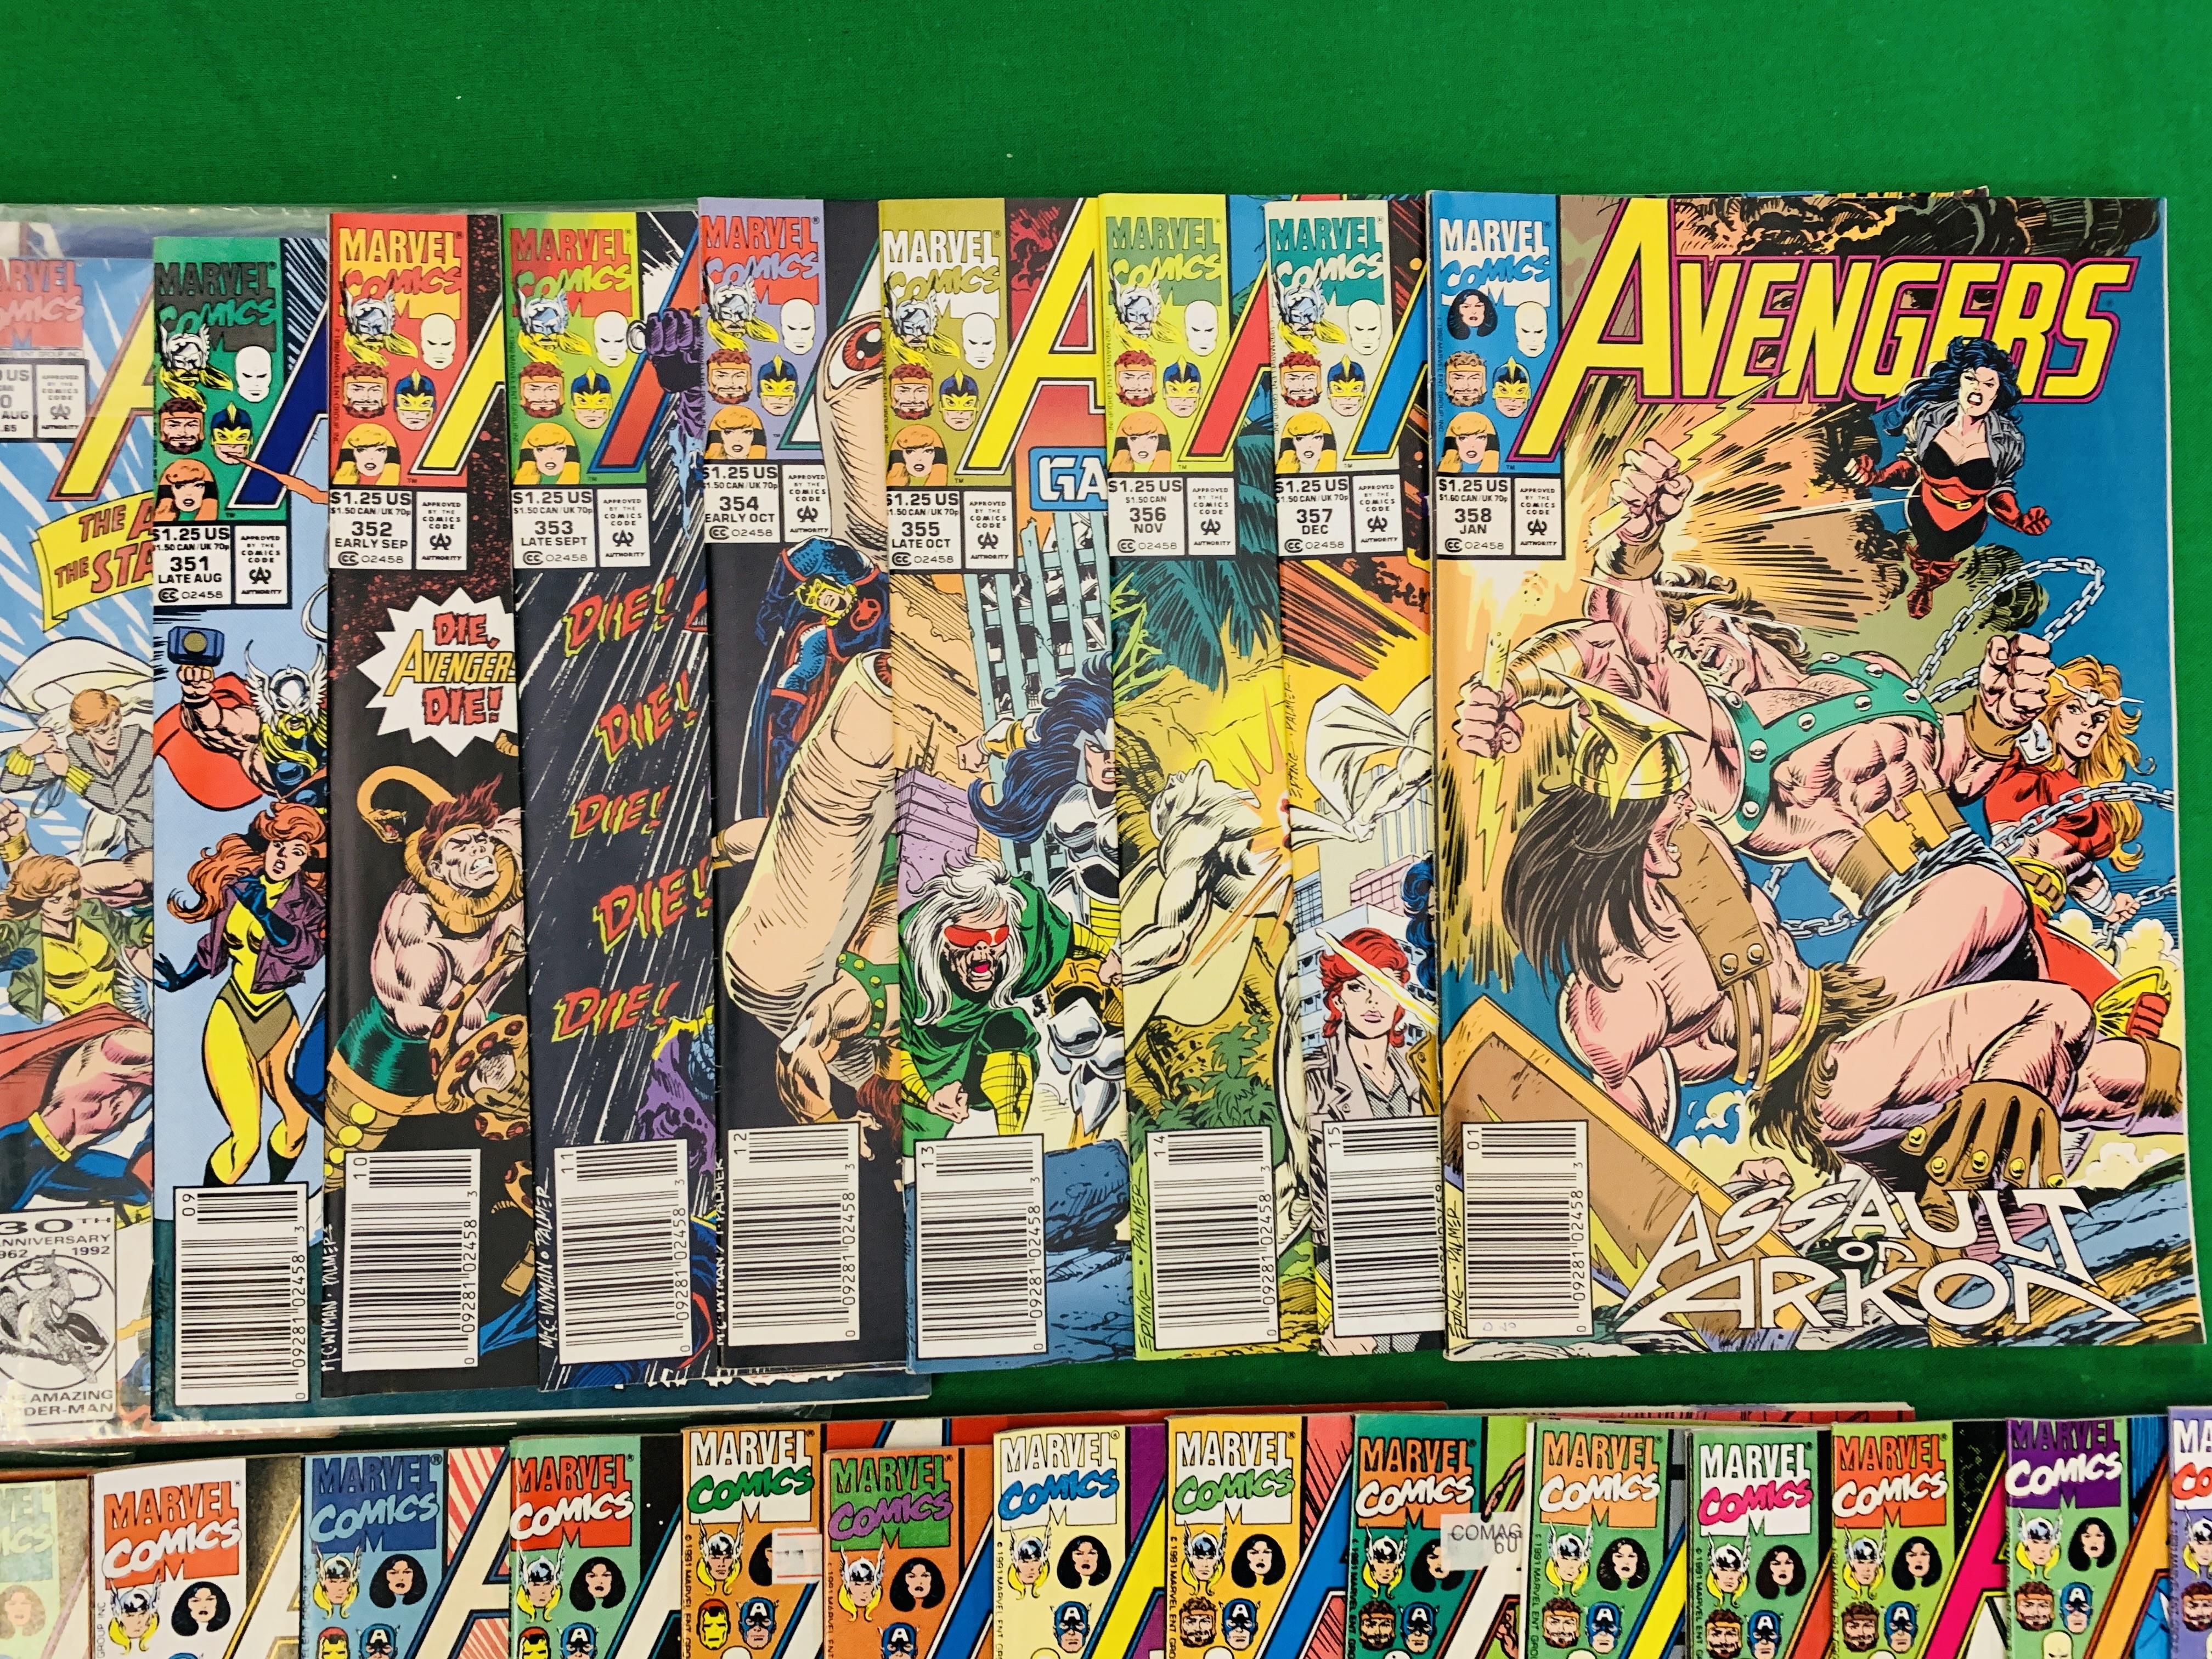 MARVEL COMICS THE AVENGERS NO. 300 - 402, MISSING ISSUES 325, 329 AND 334. - Image 9 of 16